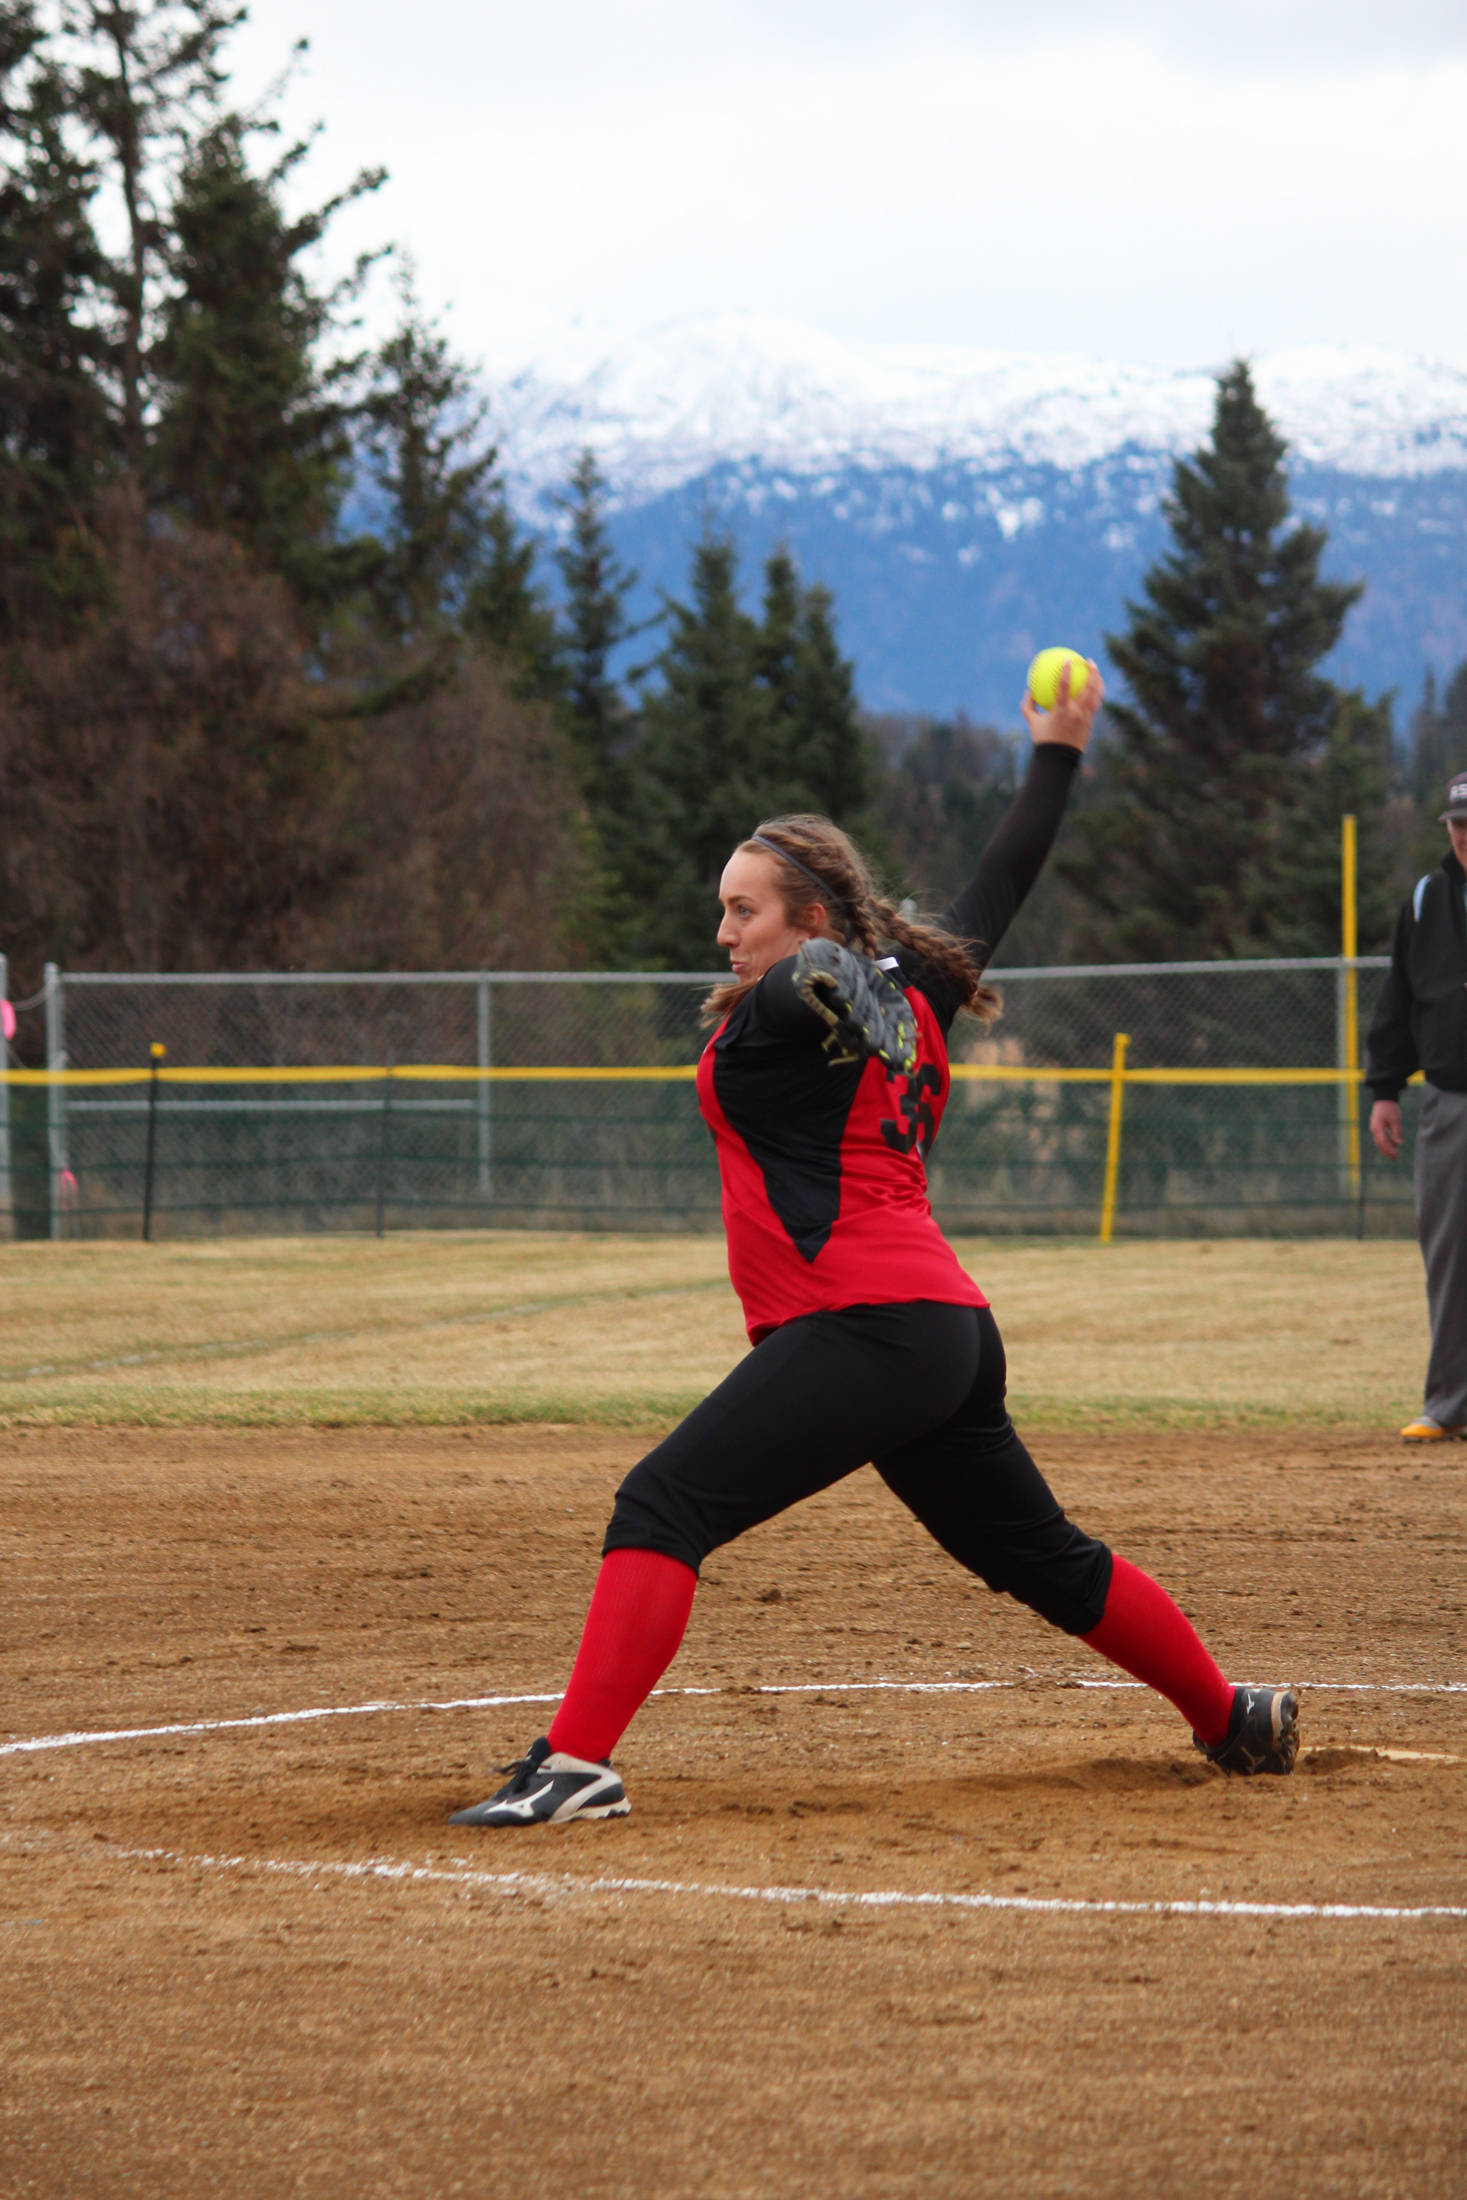 Kenai Central High School’s Savannah J …? pitches the ball during the team’s game against Homer High School on Tuesday, May 8, 2018 in Jack Gist Park in Homer, Alaska. (Photo by Megan Pacer/Homer News)